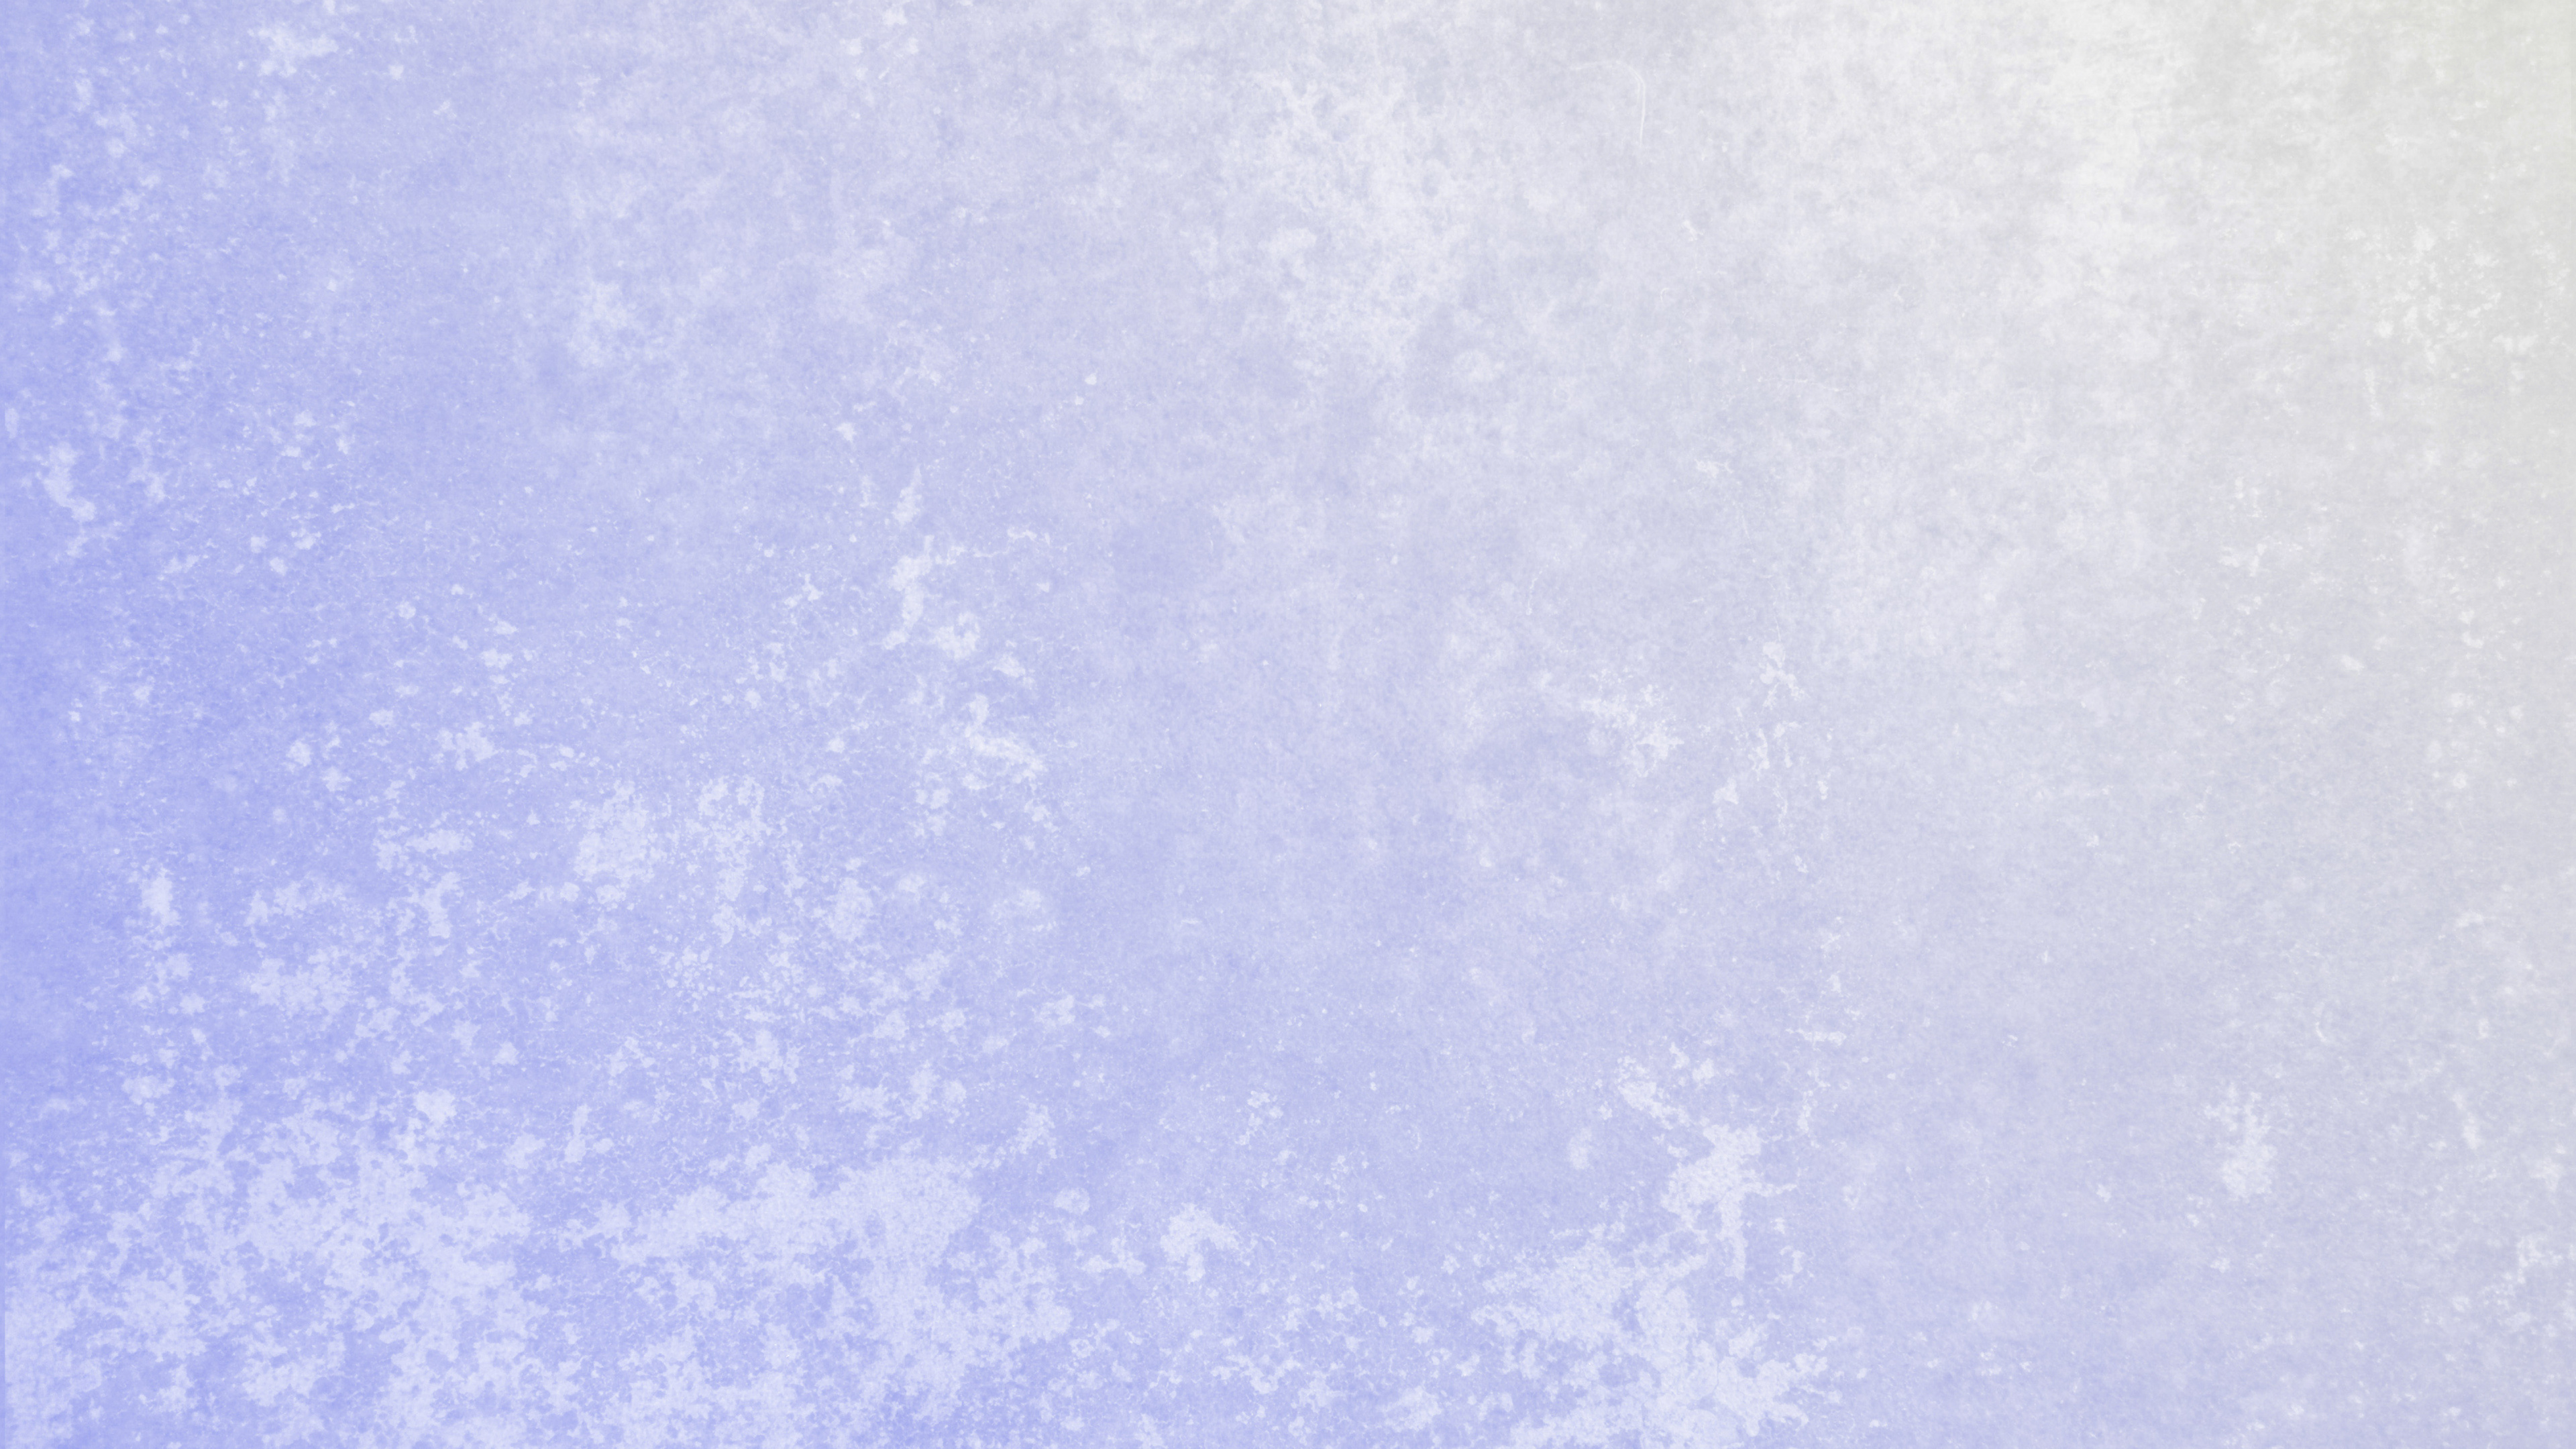 Blue Textile With White Paint. Wallpaper in 3840x2160 Resolution